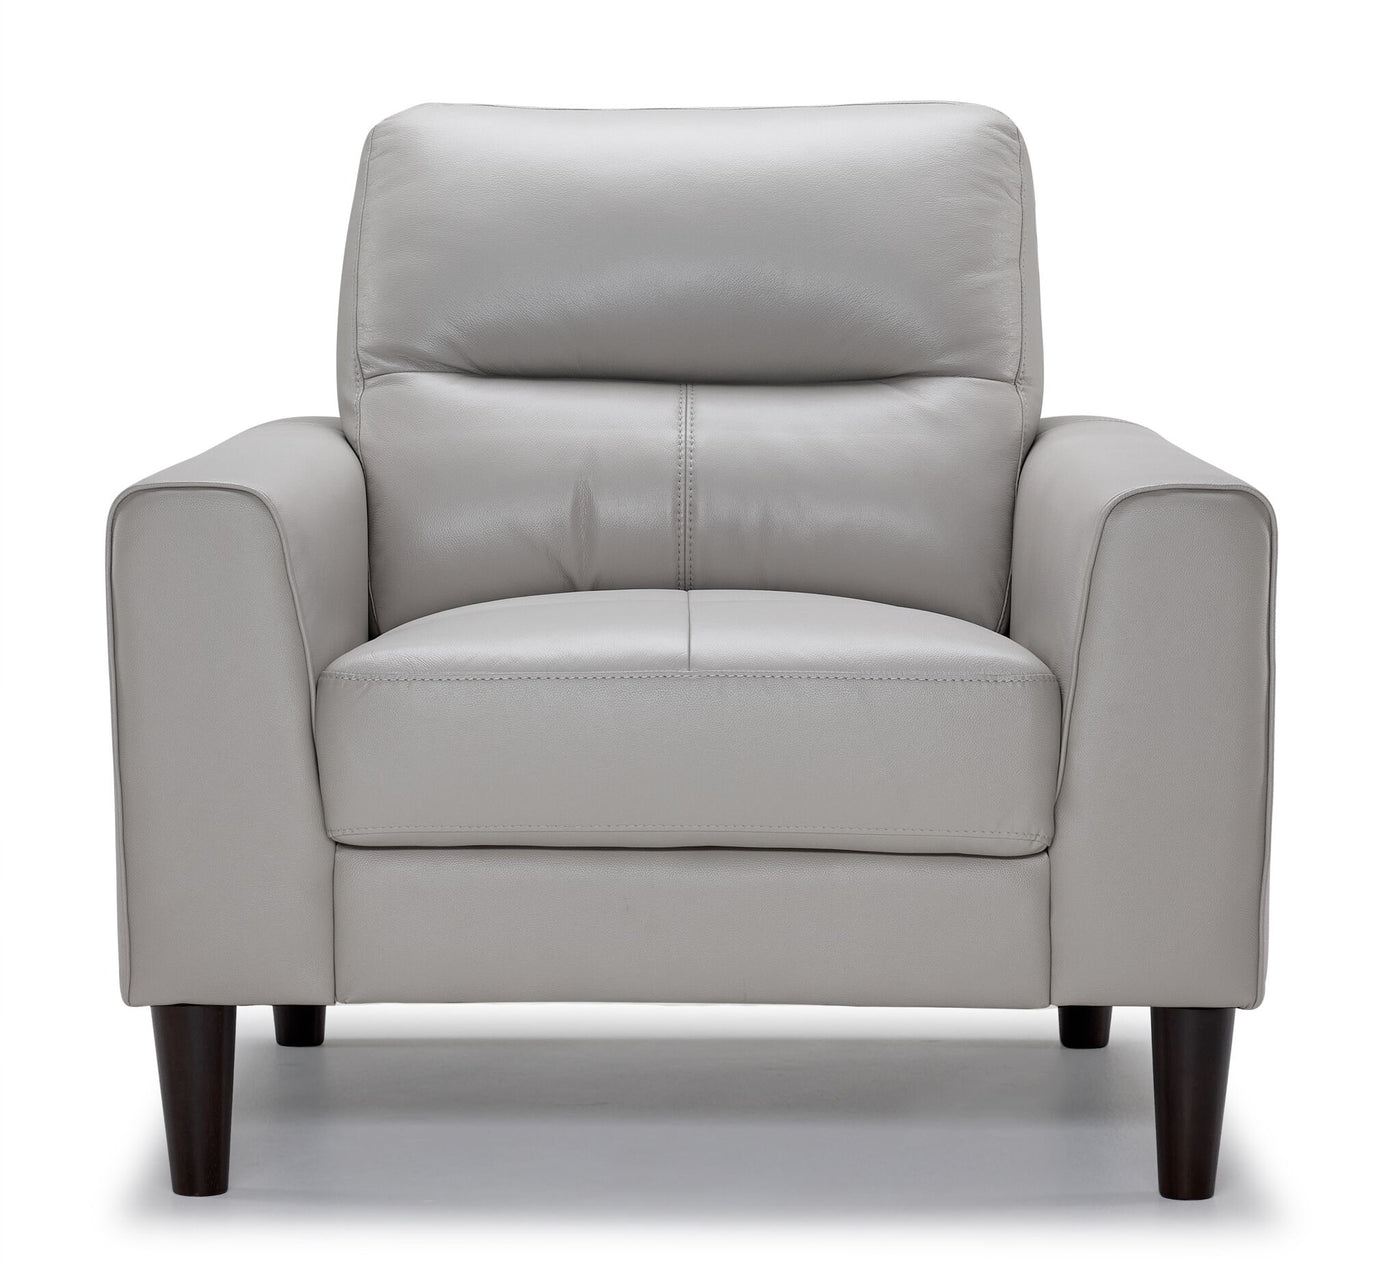 Verissimo Leather Chair - Silver